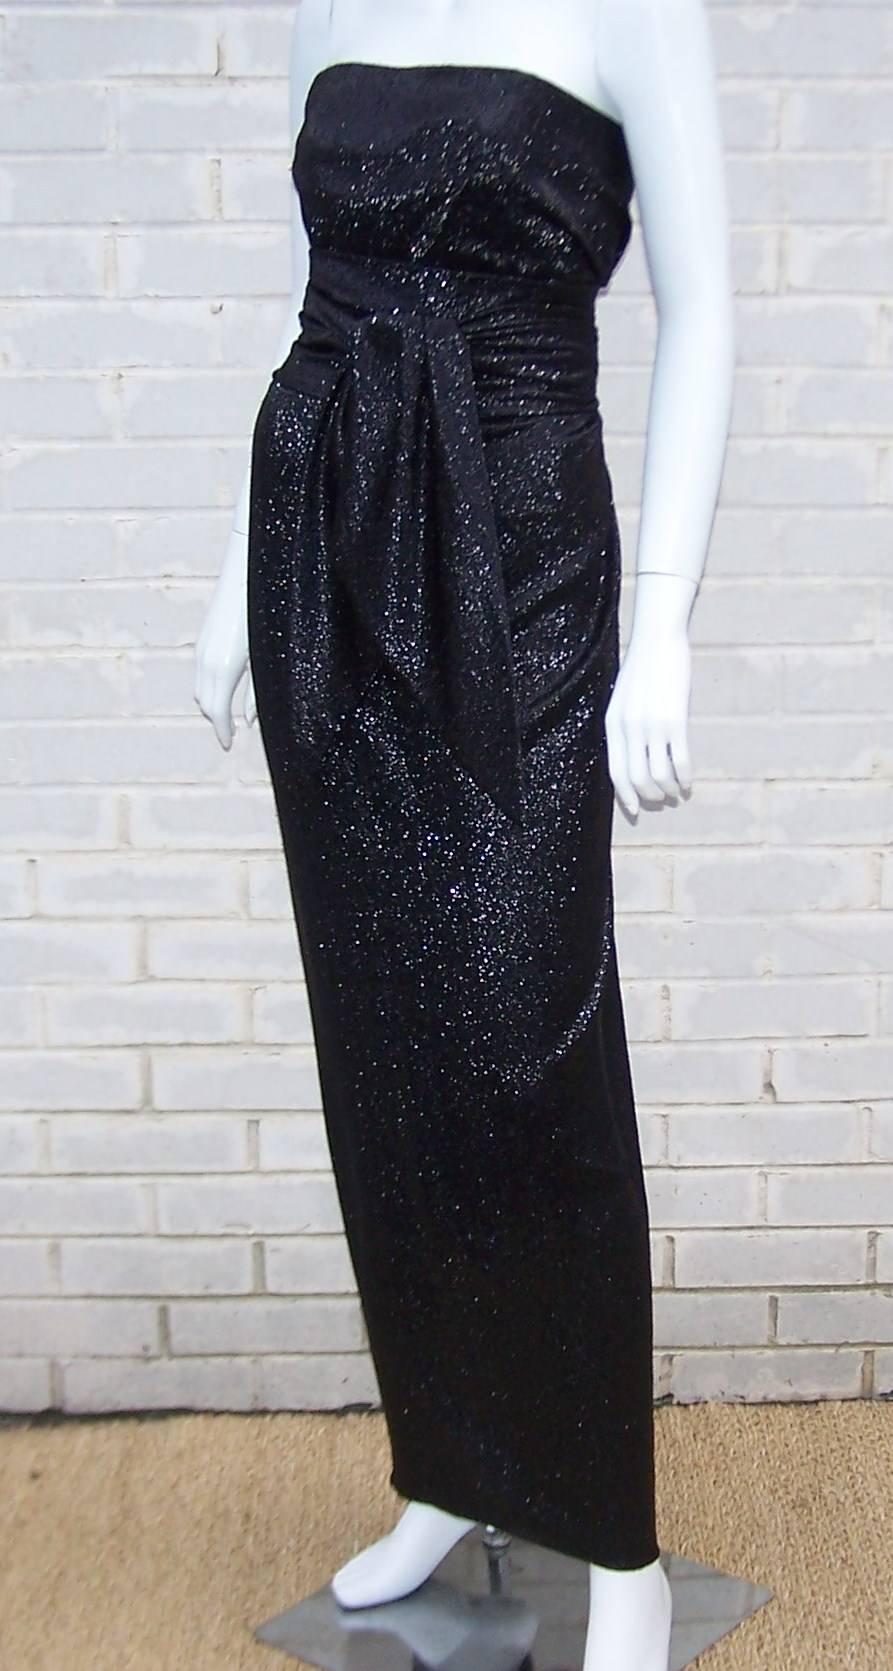 Besides Bill Blass, the star of this show is the amazing black fabric used to create this strapless column dress.  The fabric is laced with silver threading which creates a shiny shimmer of light at every turn.  The dress zips and hooks in the back